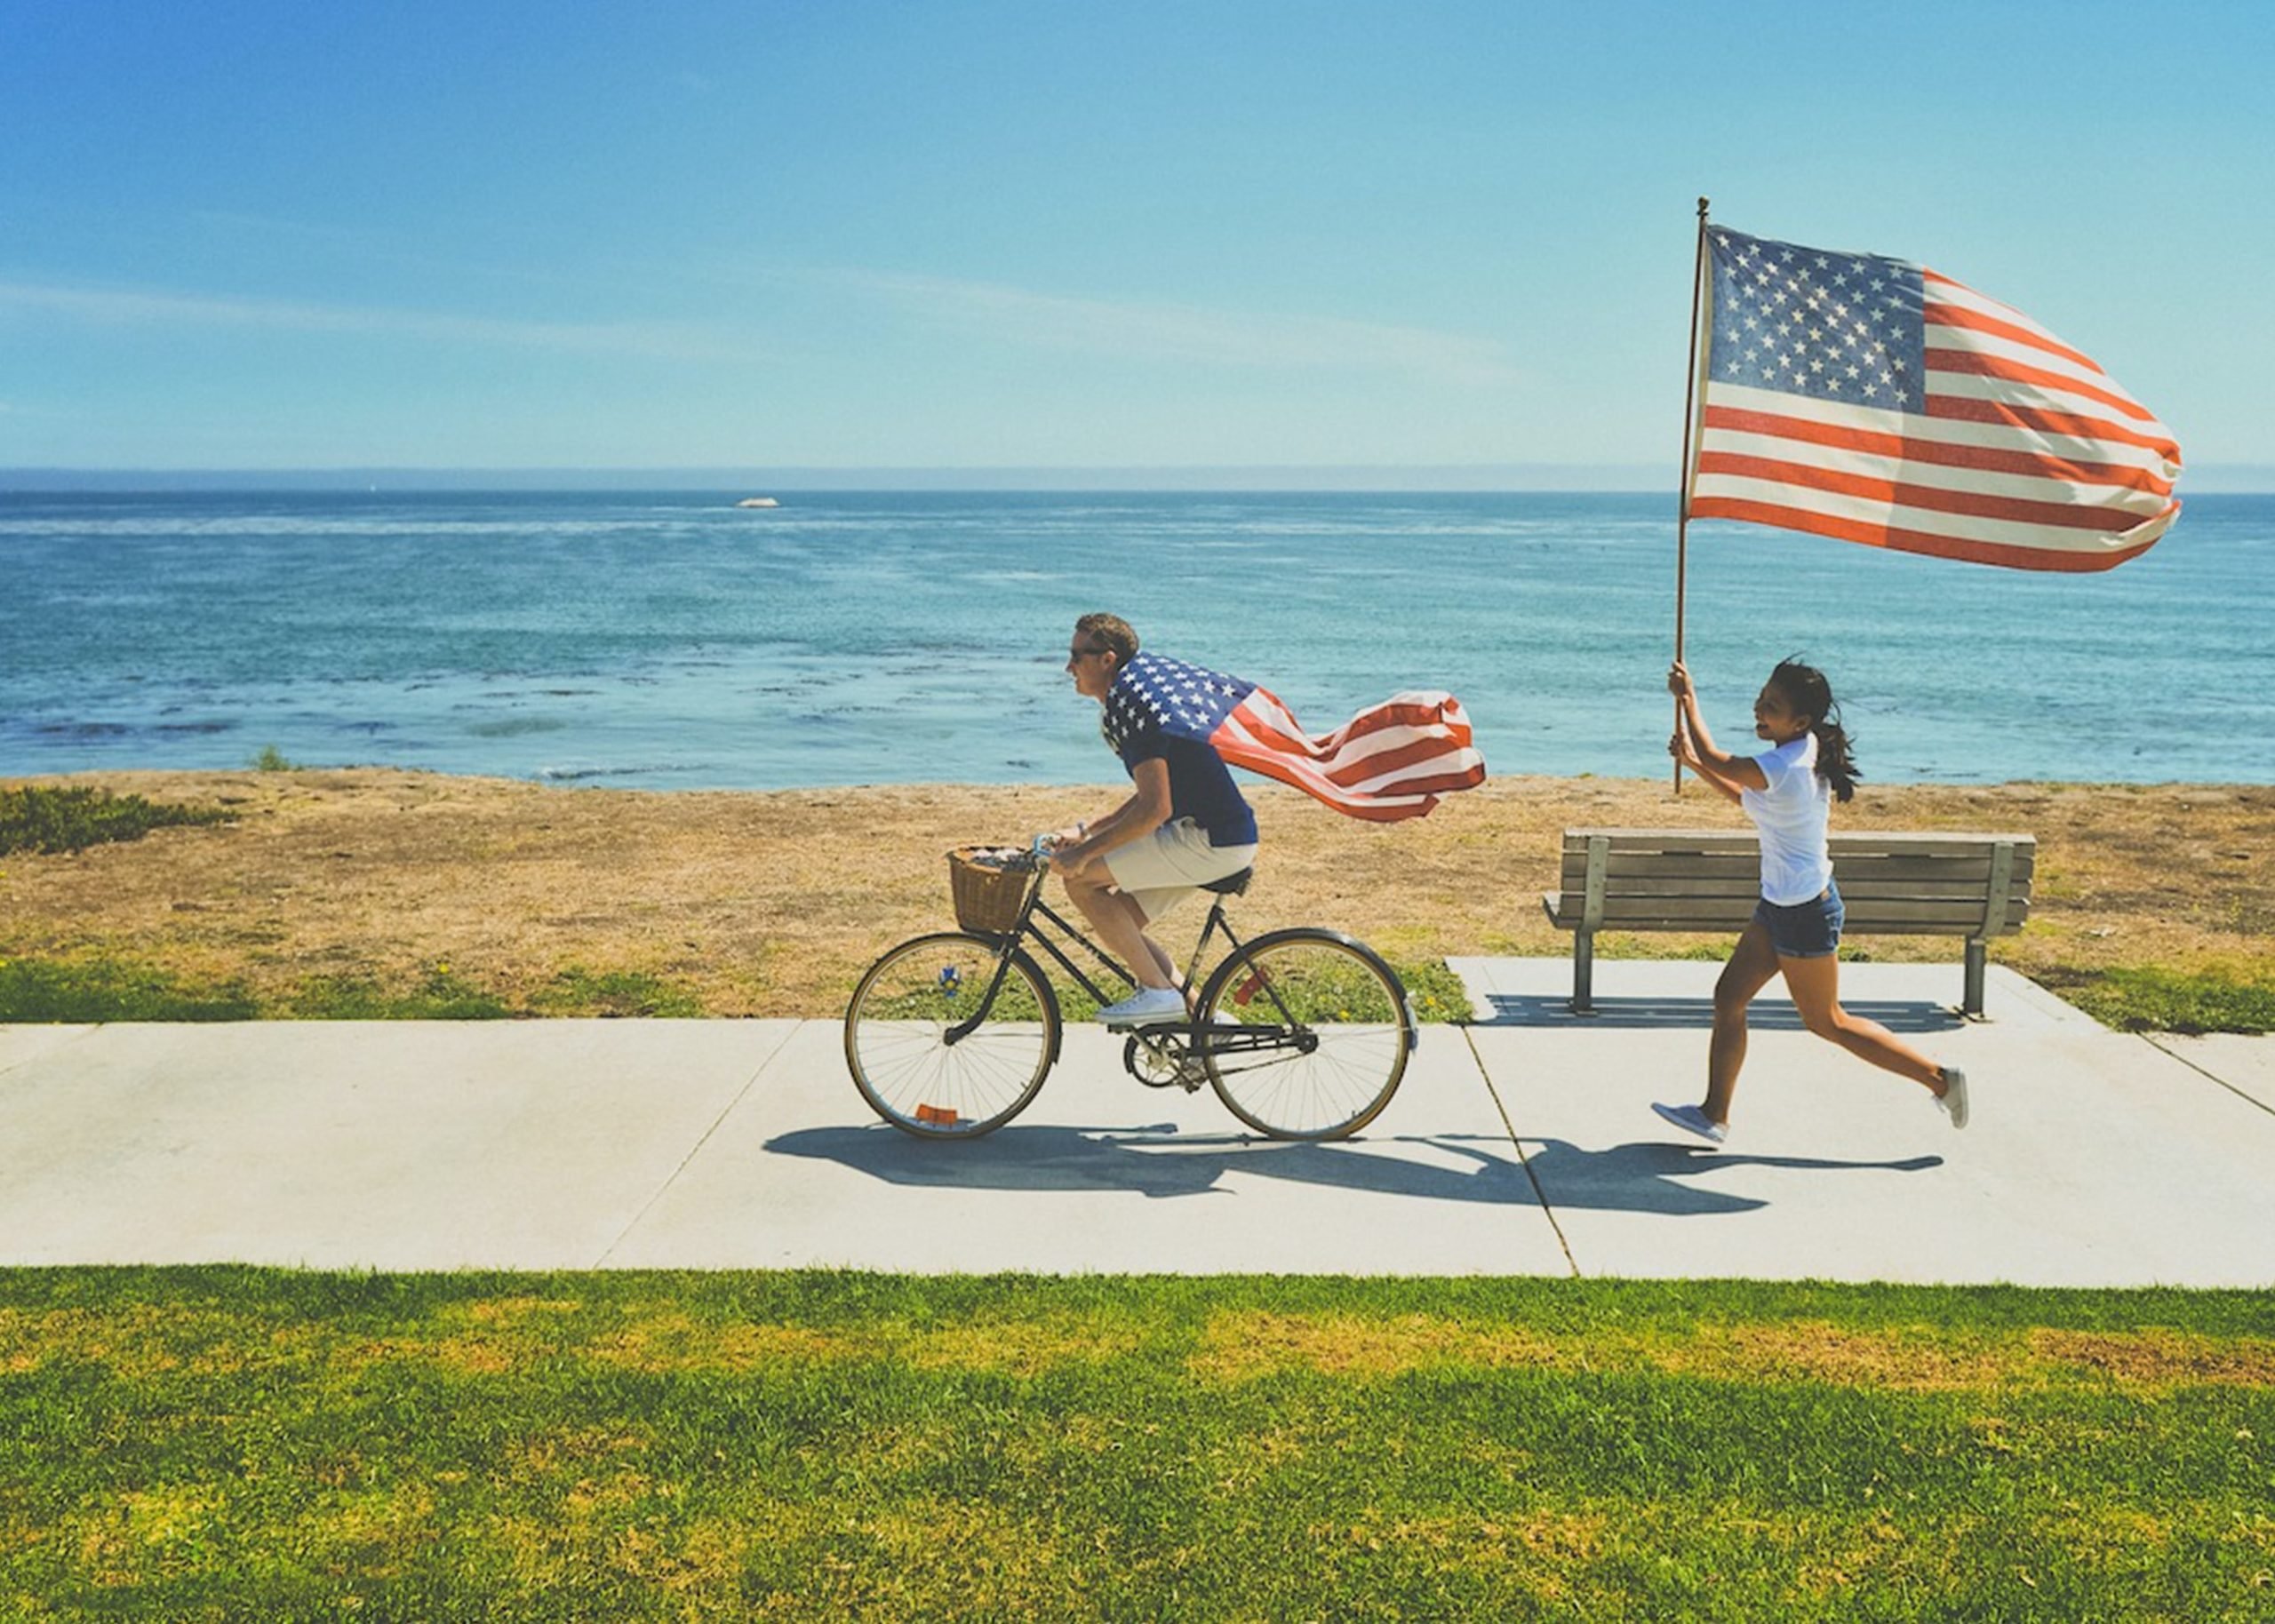 7-things-to-do-in-la-this-4th-of-july